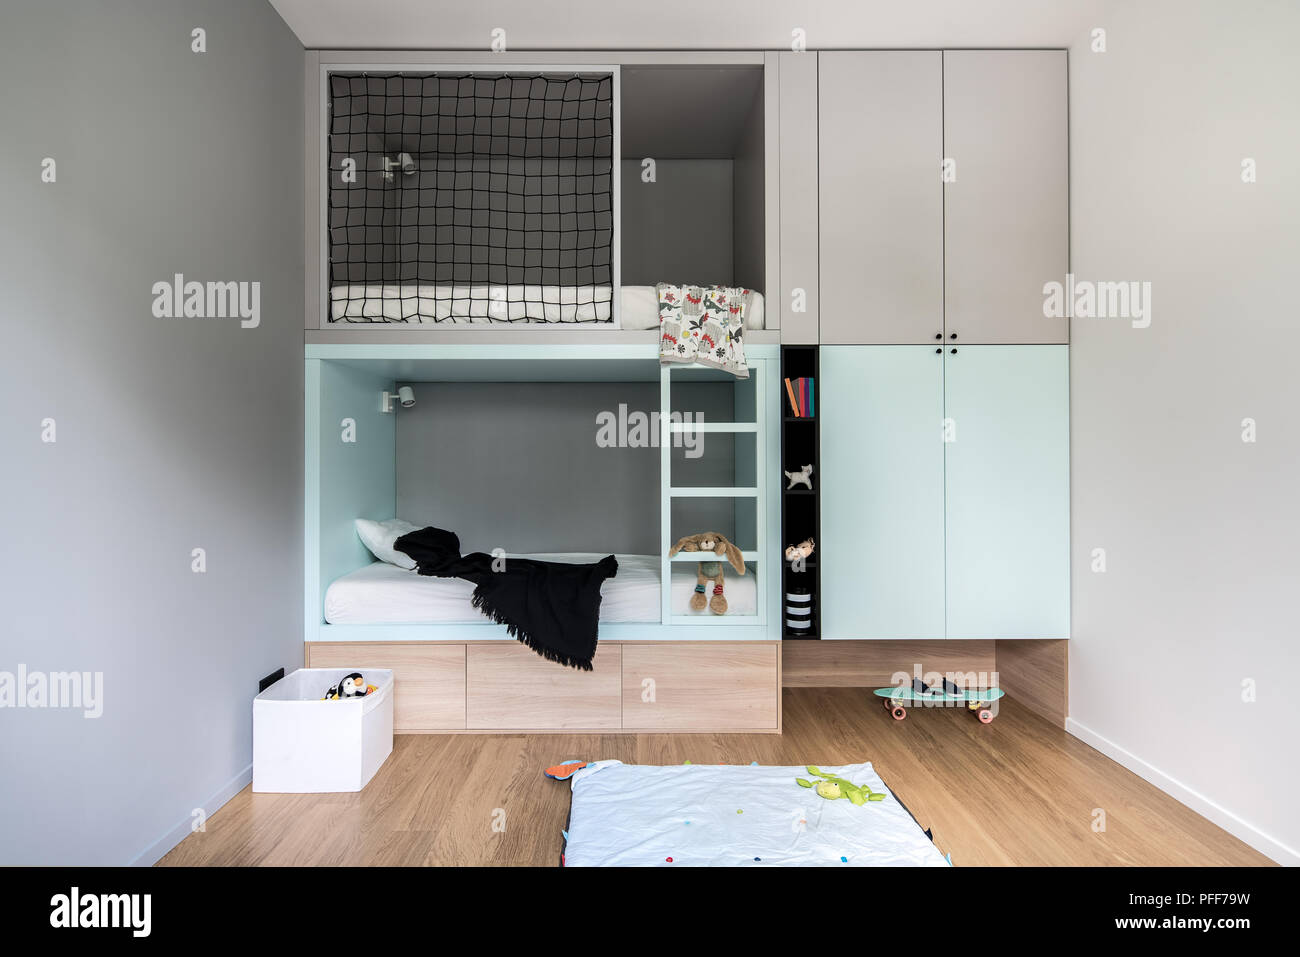 Kid's room in modern style with light walls and a parquet on the floor. There is a multicolored loft bed with lockers and shelves with toys and books, Stock Photo